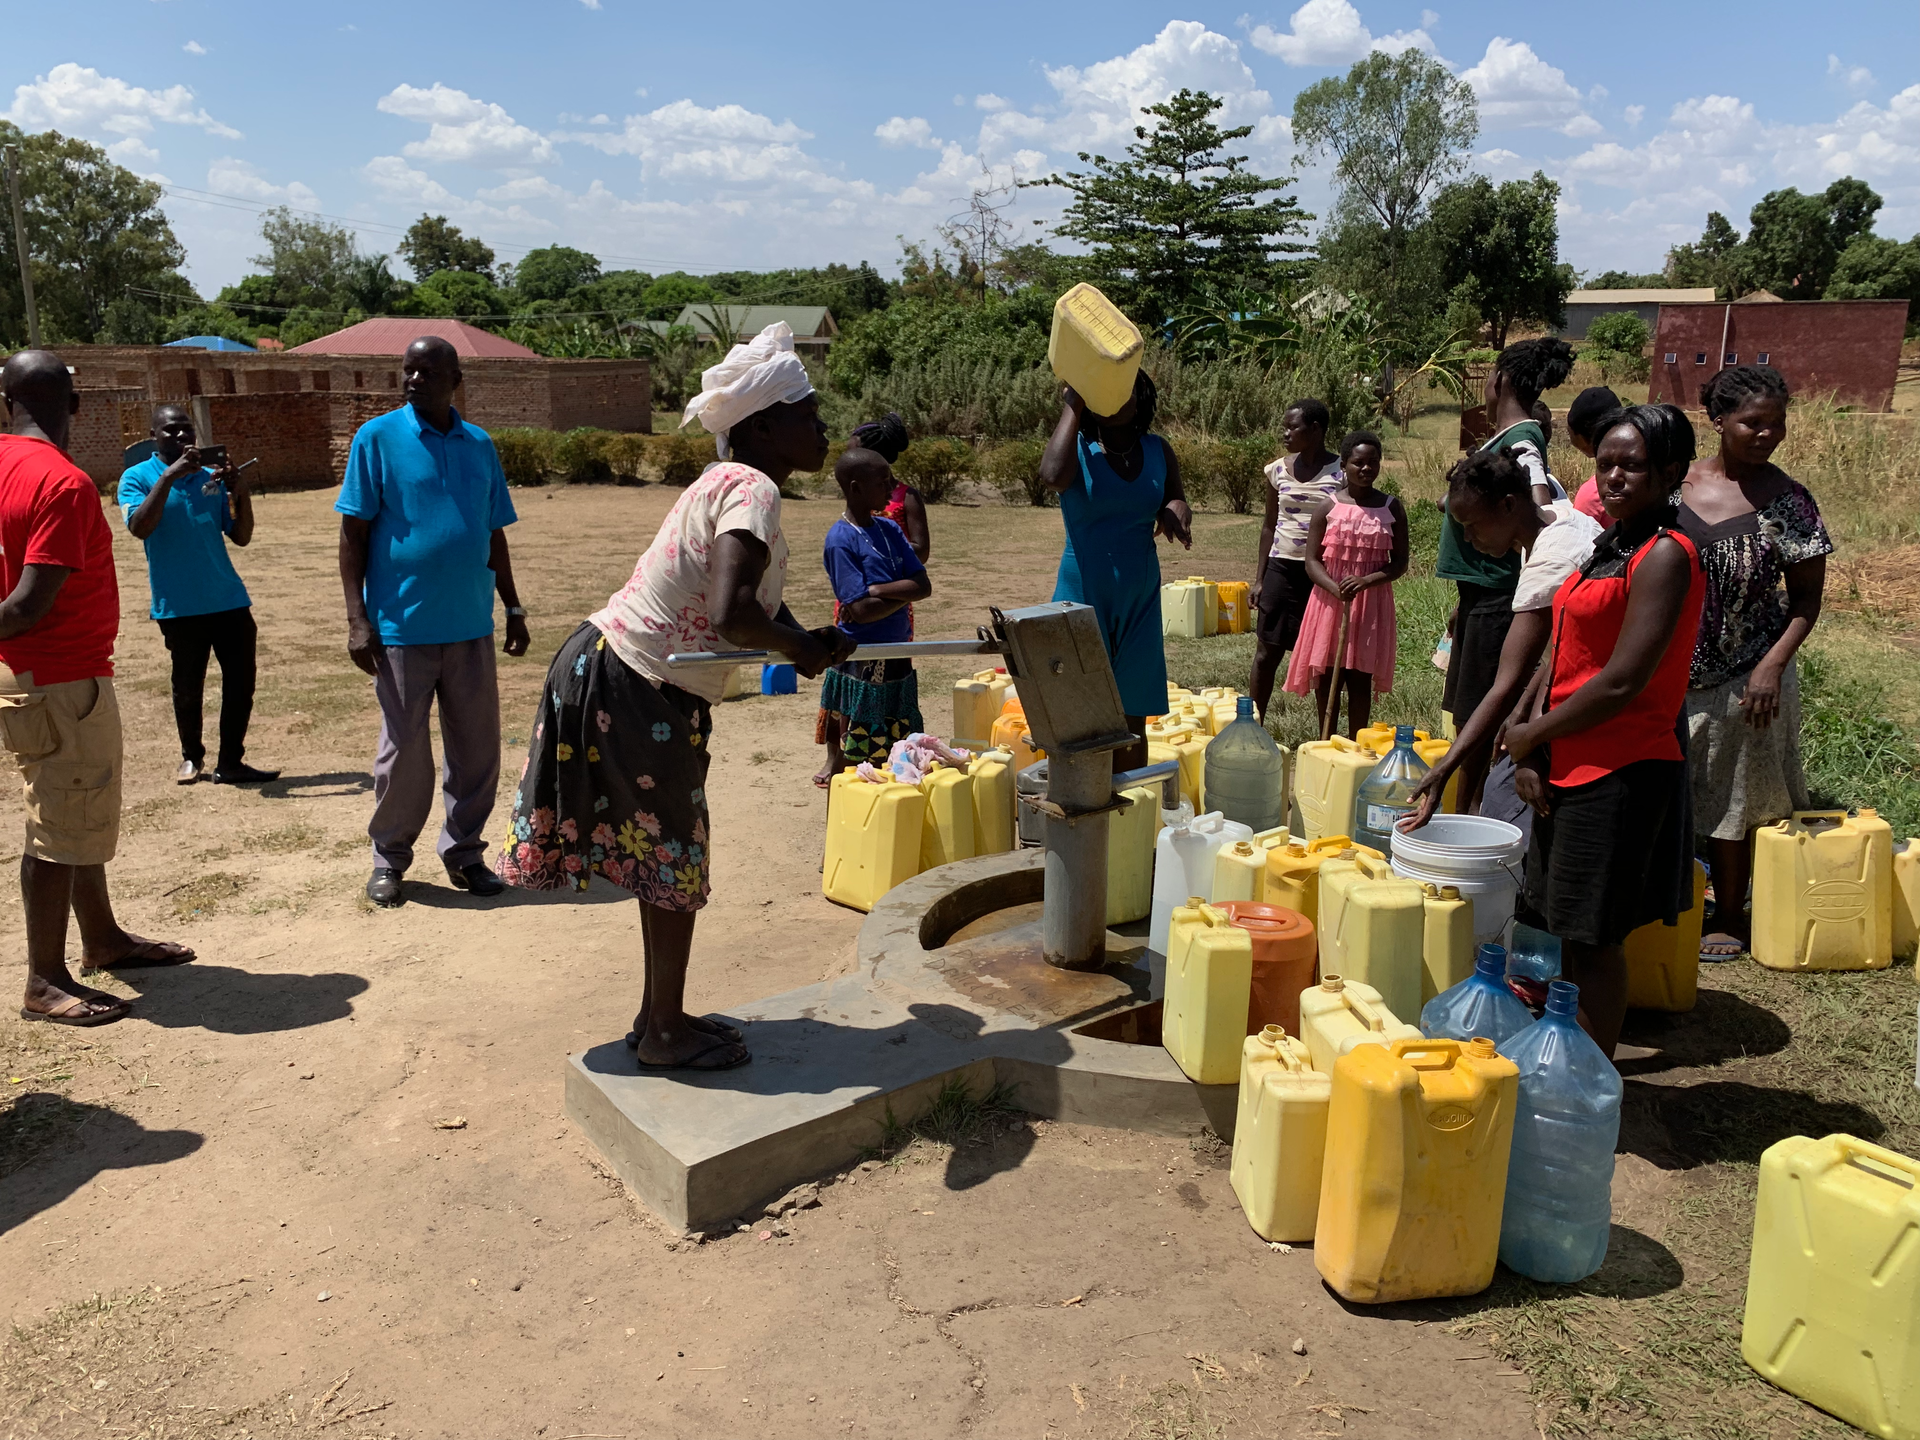 Women in their role in Uganda as the ones to gather the water